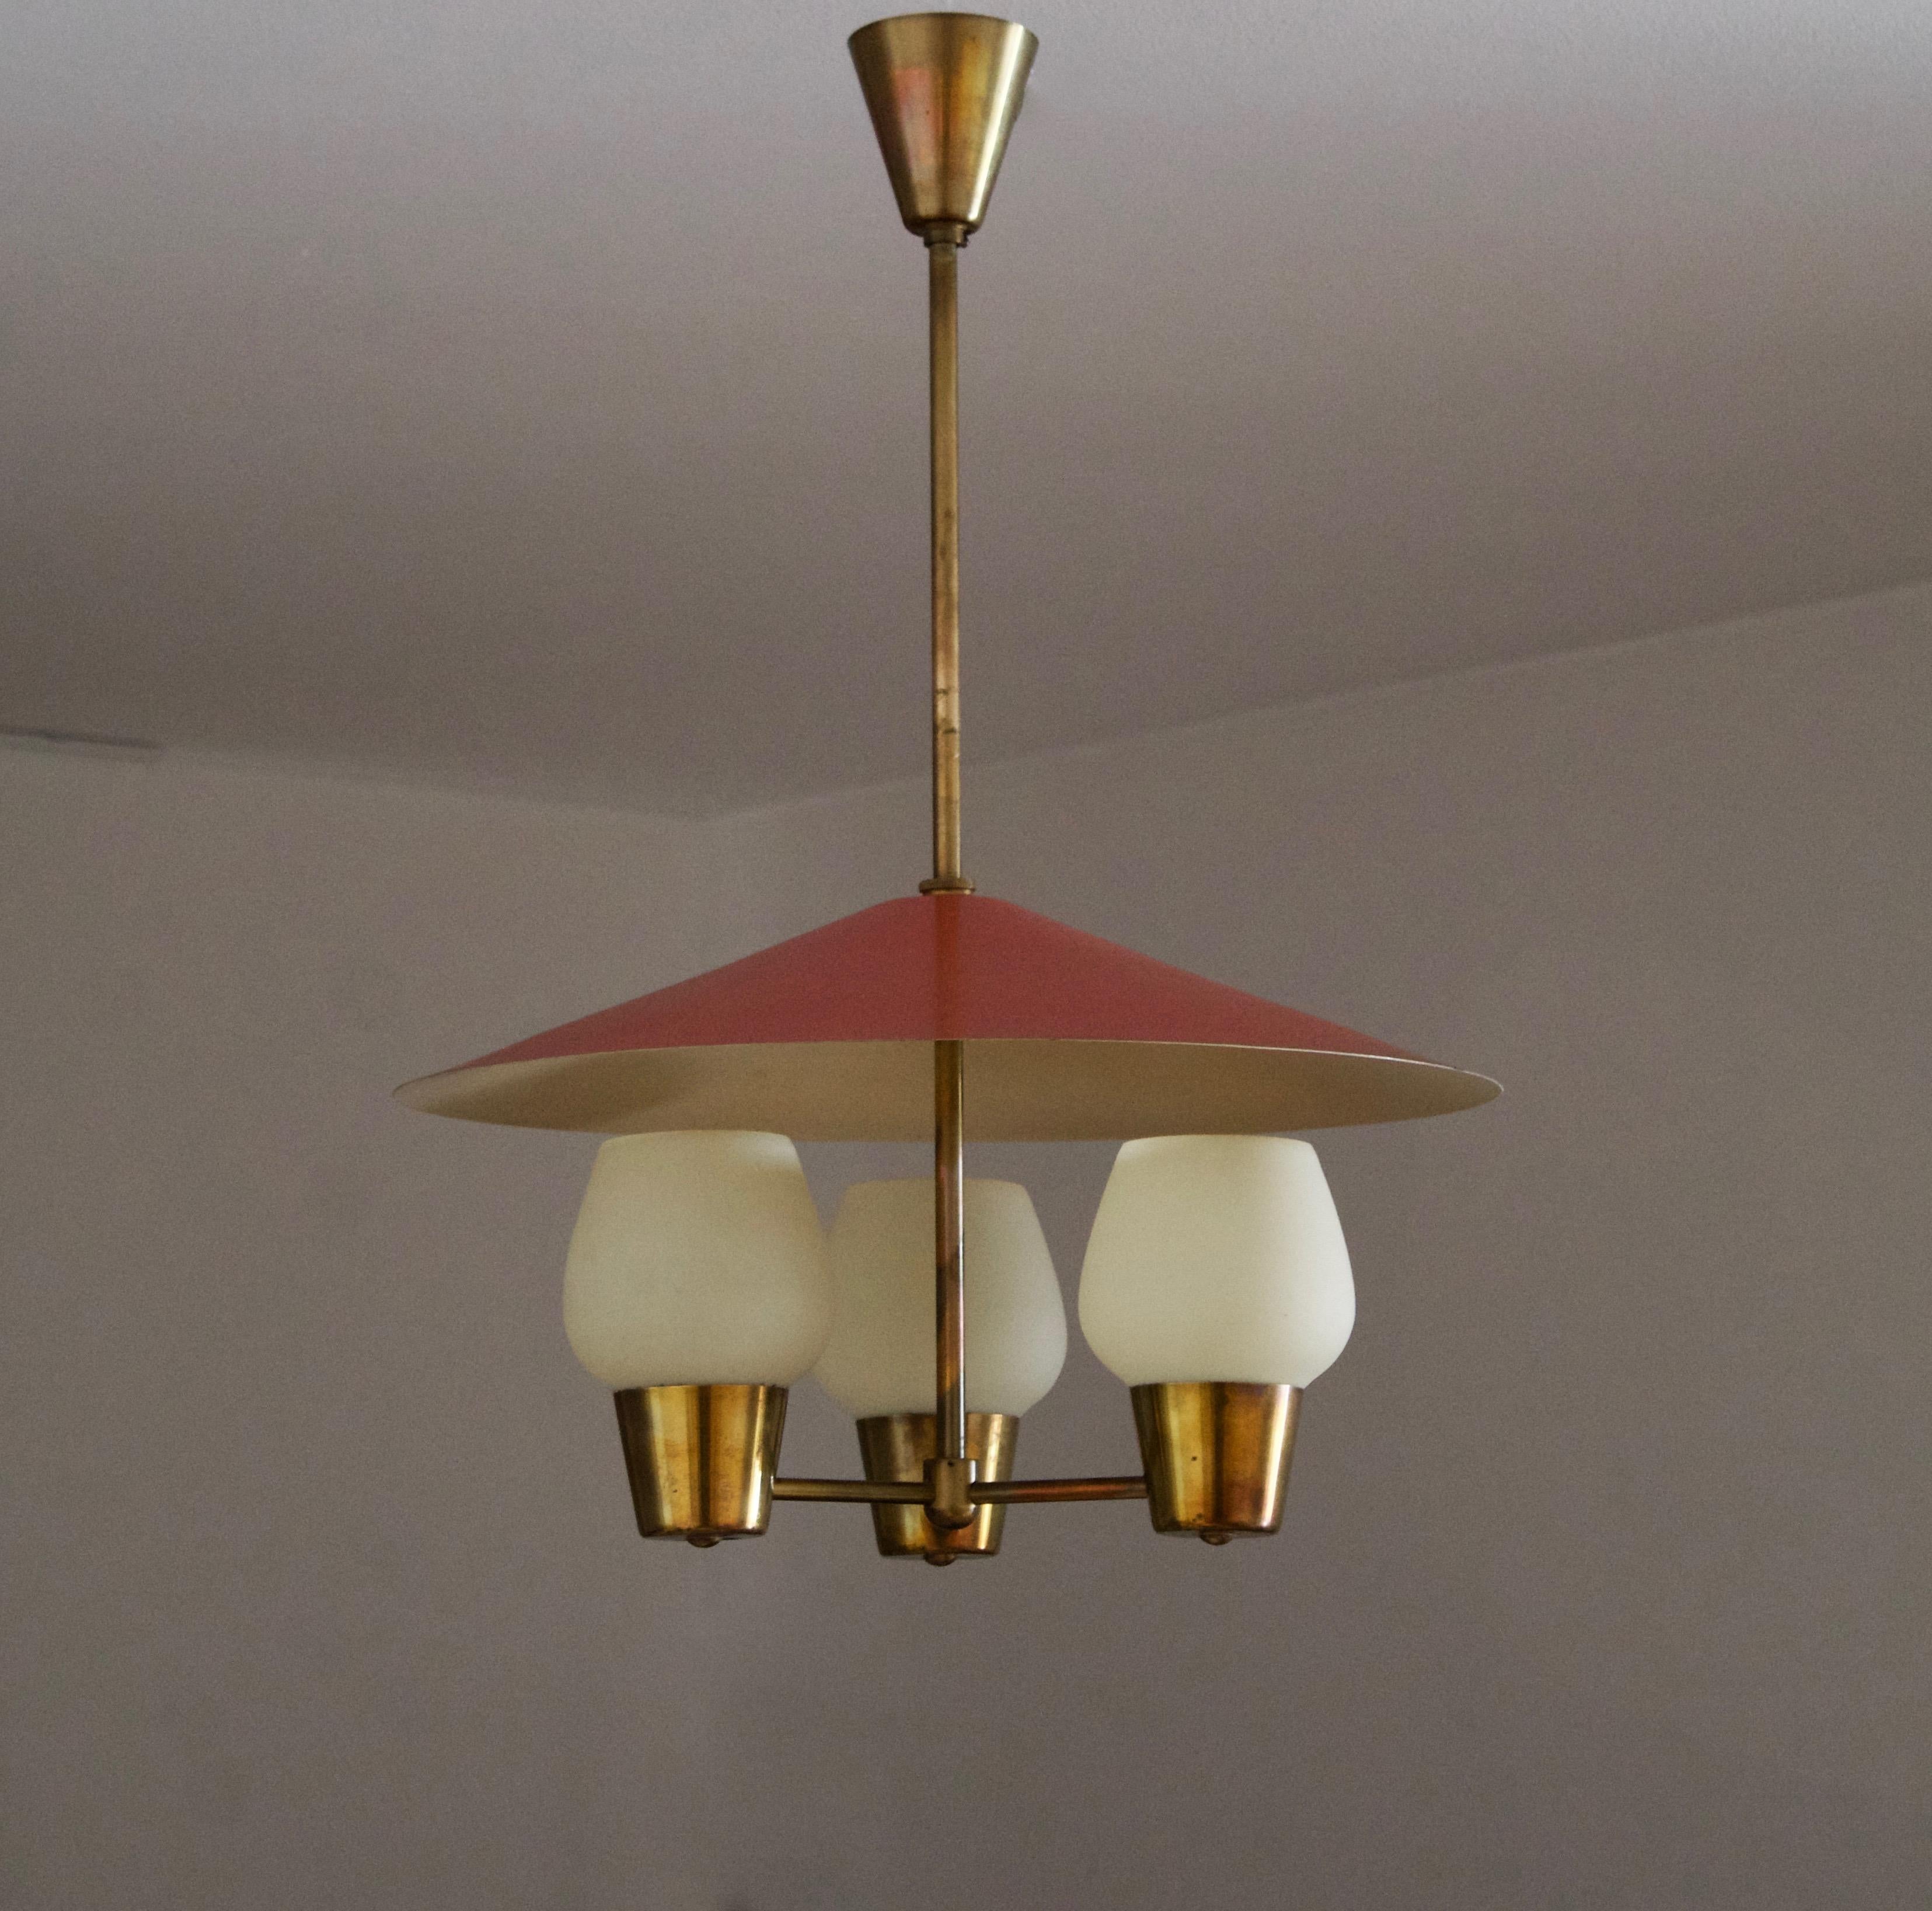 A chandelier / pendant light. Designed and produced in Denmark, 1950s. Production attributed to Lyfa. 

